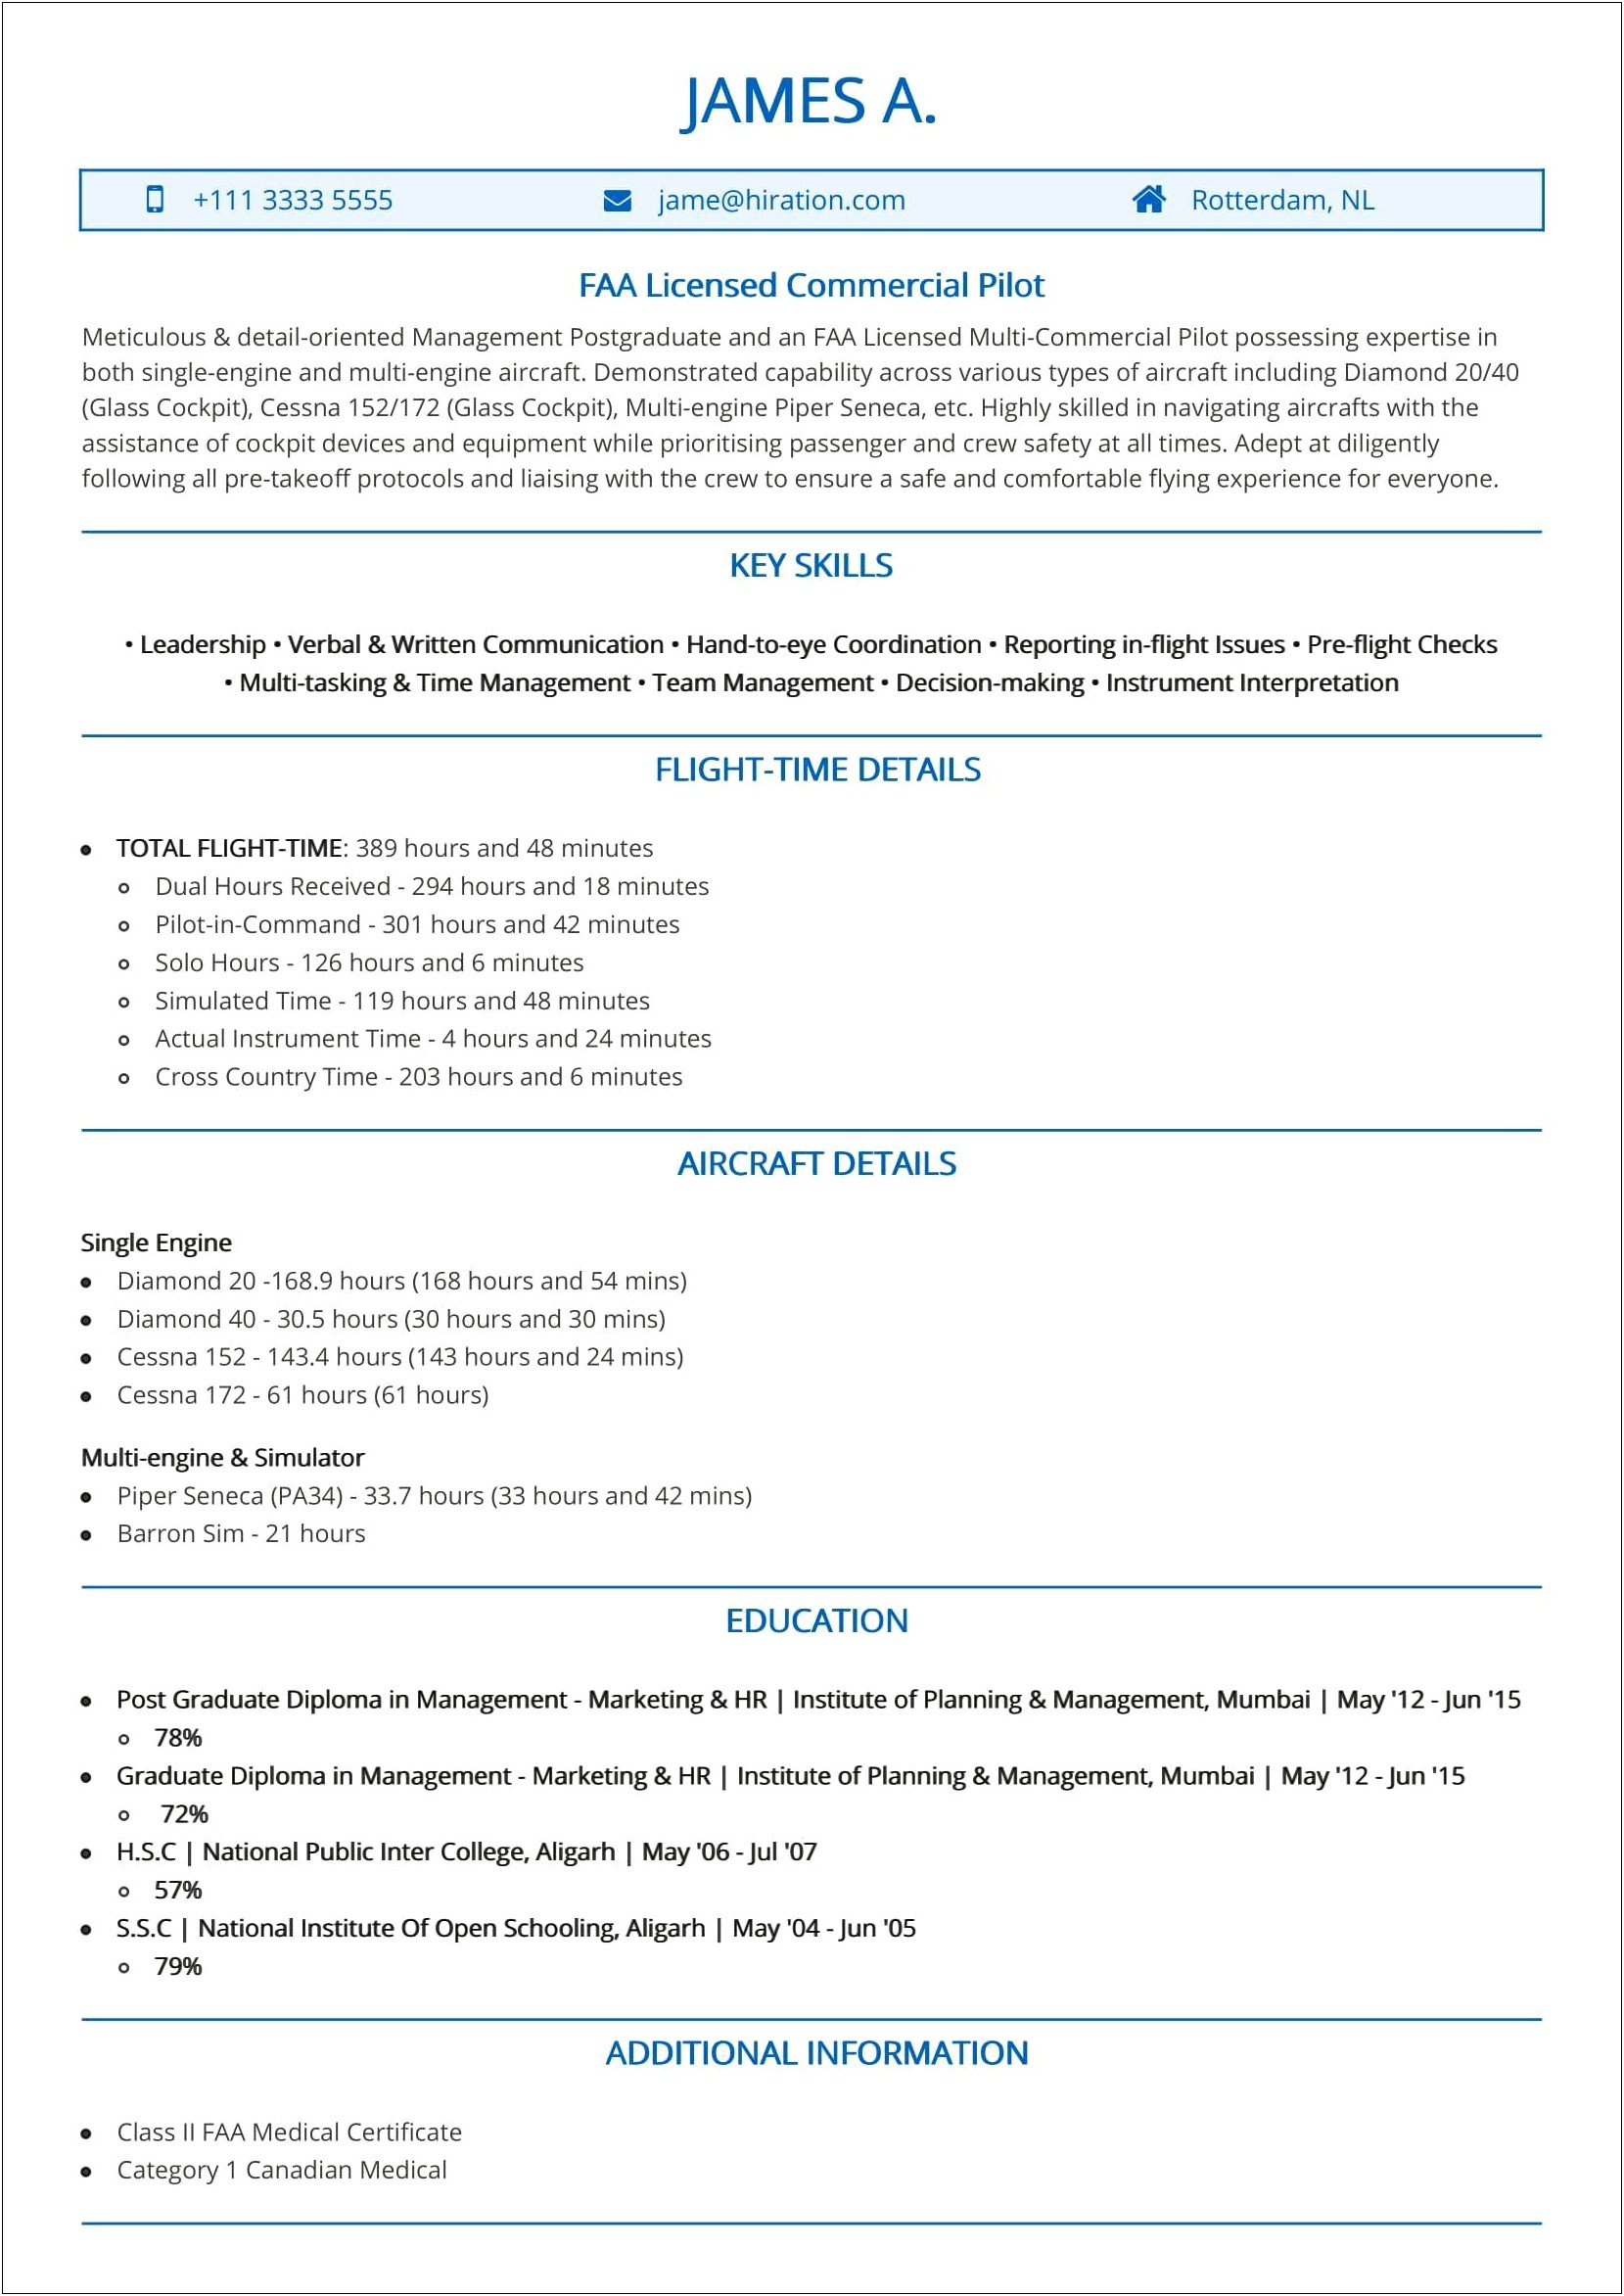 Listing Skills Without Work Experience Resume